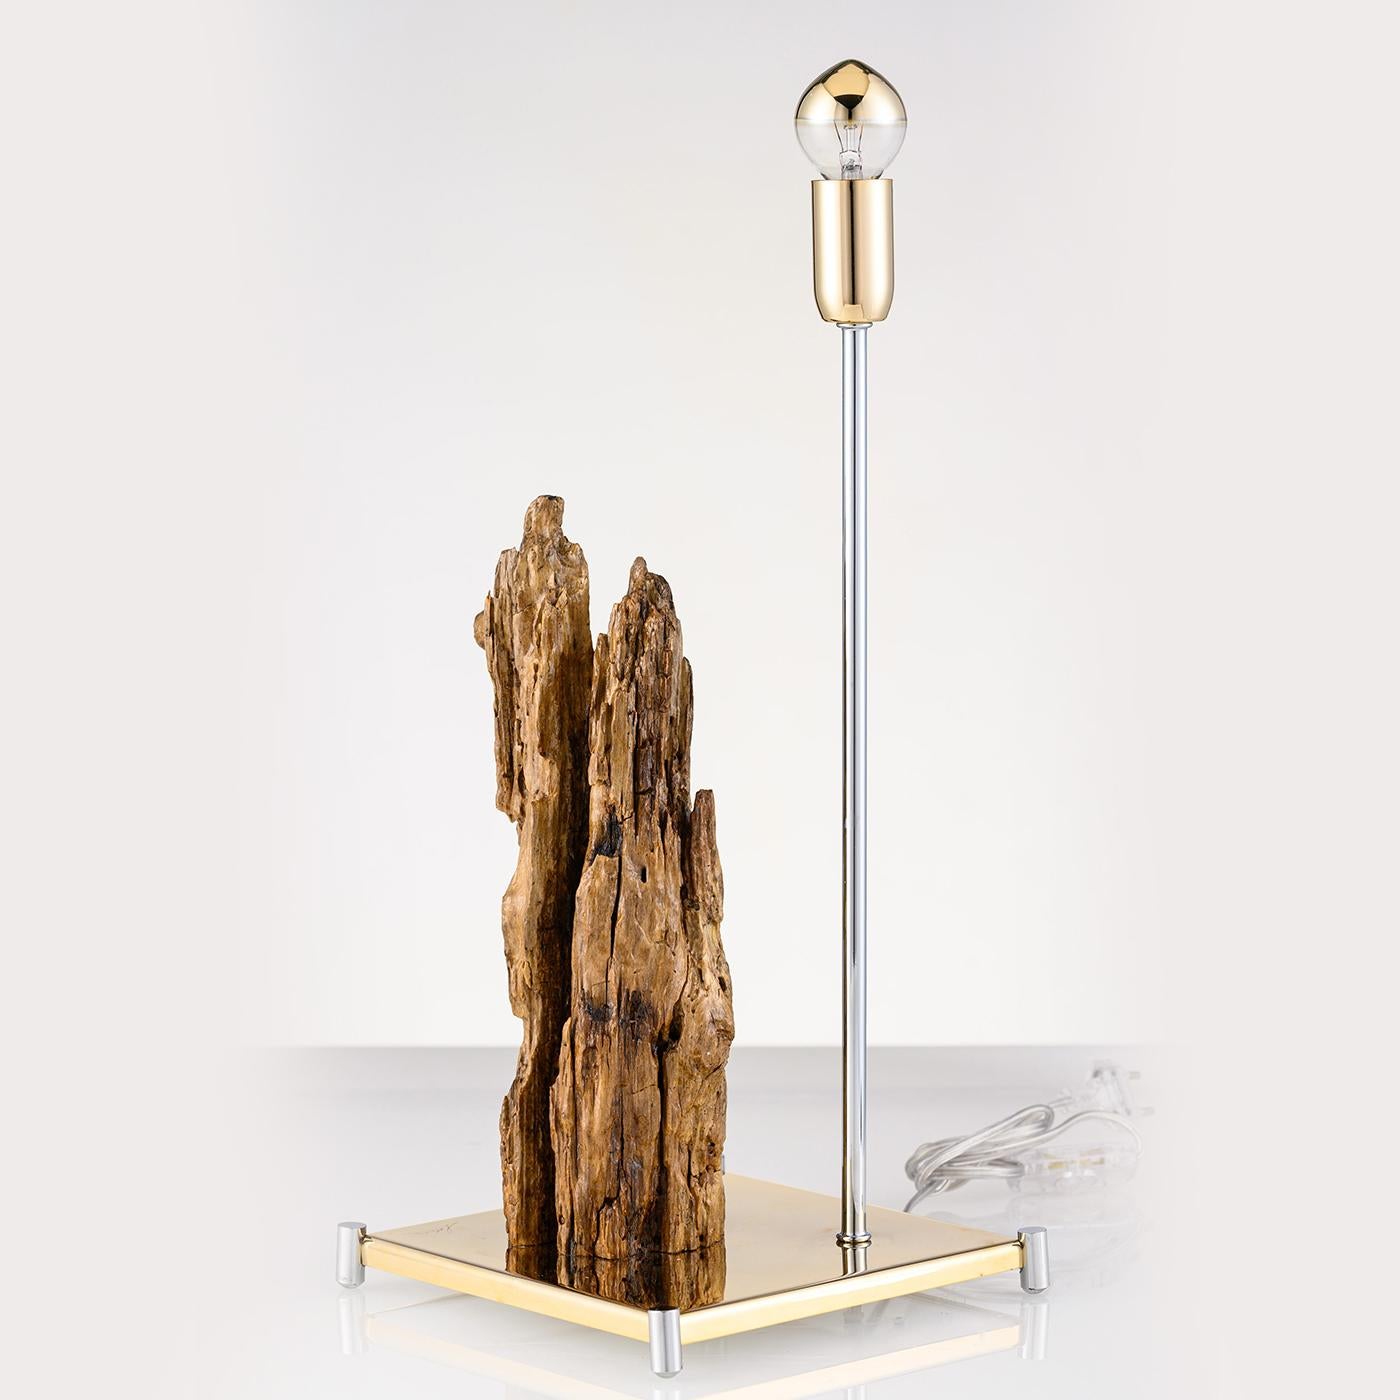 Featuring sea wood from the Amalfi Coast, the stunning Stalattite lighting sculpture, is both sophisticated and unique in design. Sitting atop a reflective gold stainless steel base with silver brass feet, the unique wood sculpture provides an